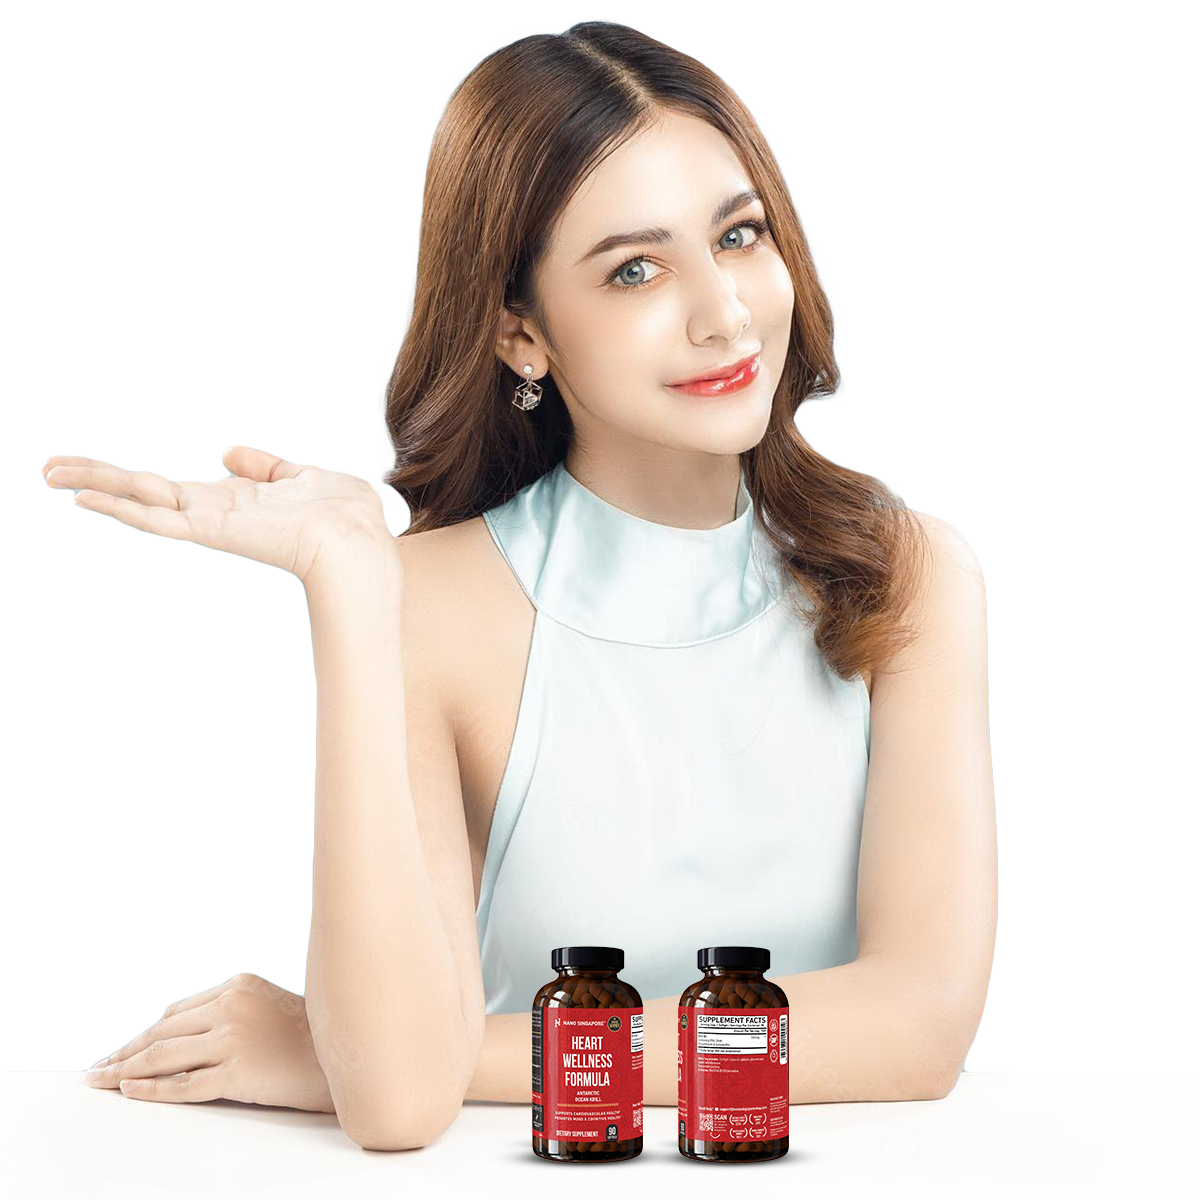 beautiful lady with two bottle of krill oil singapore in front of her